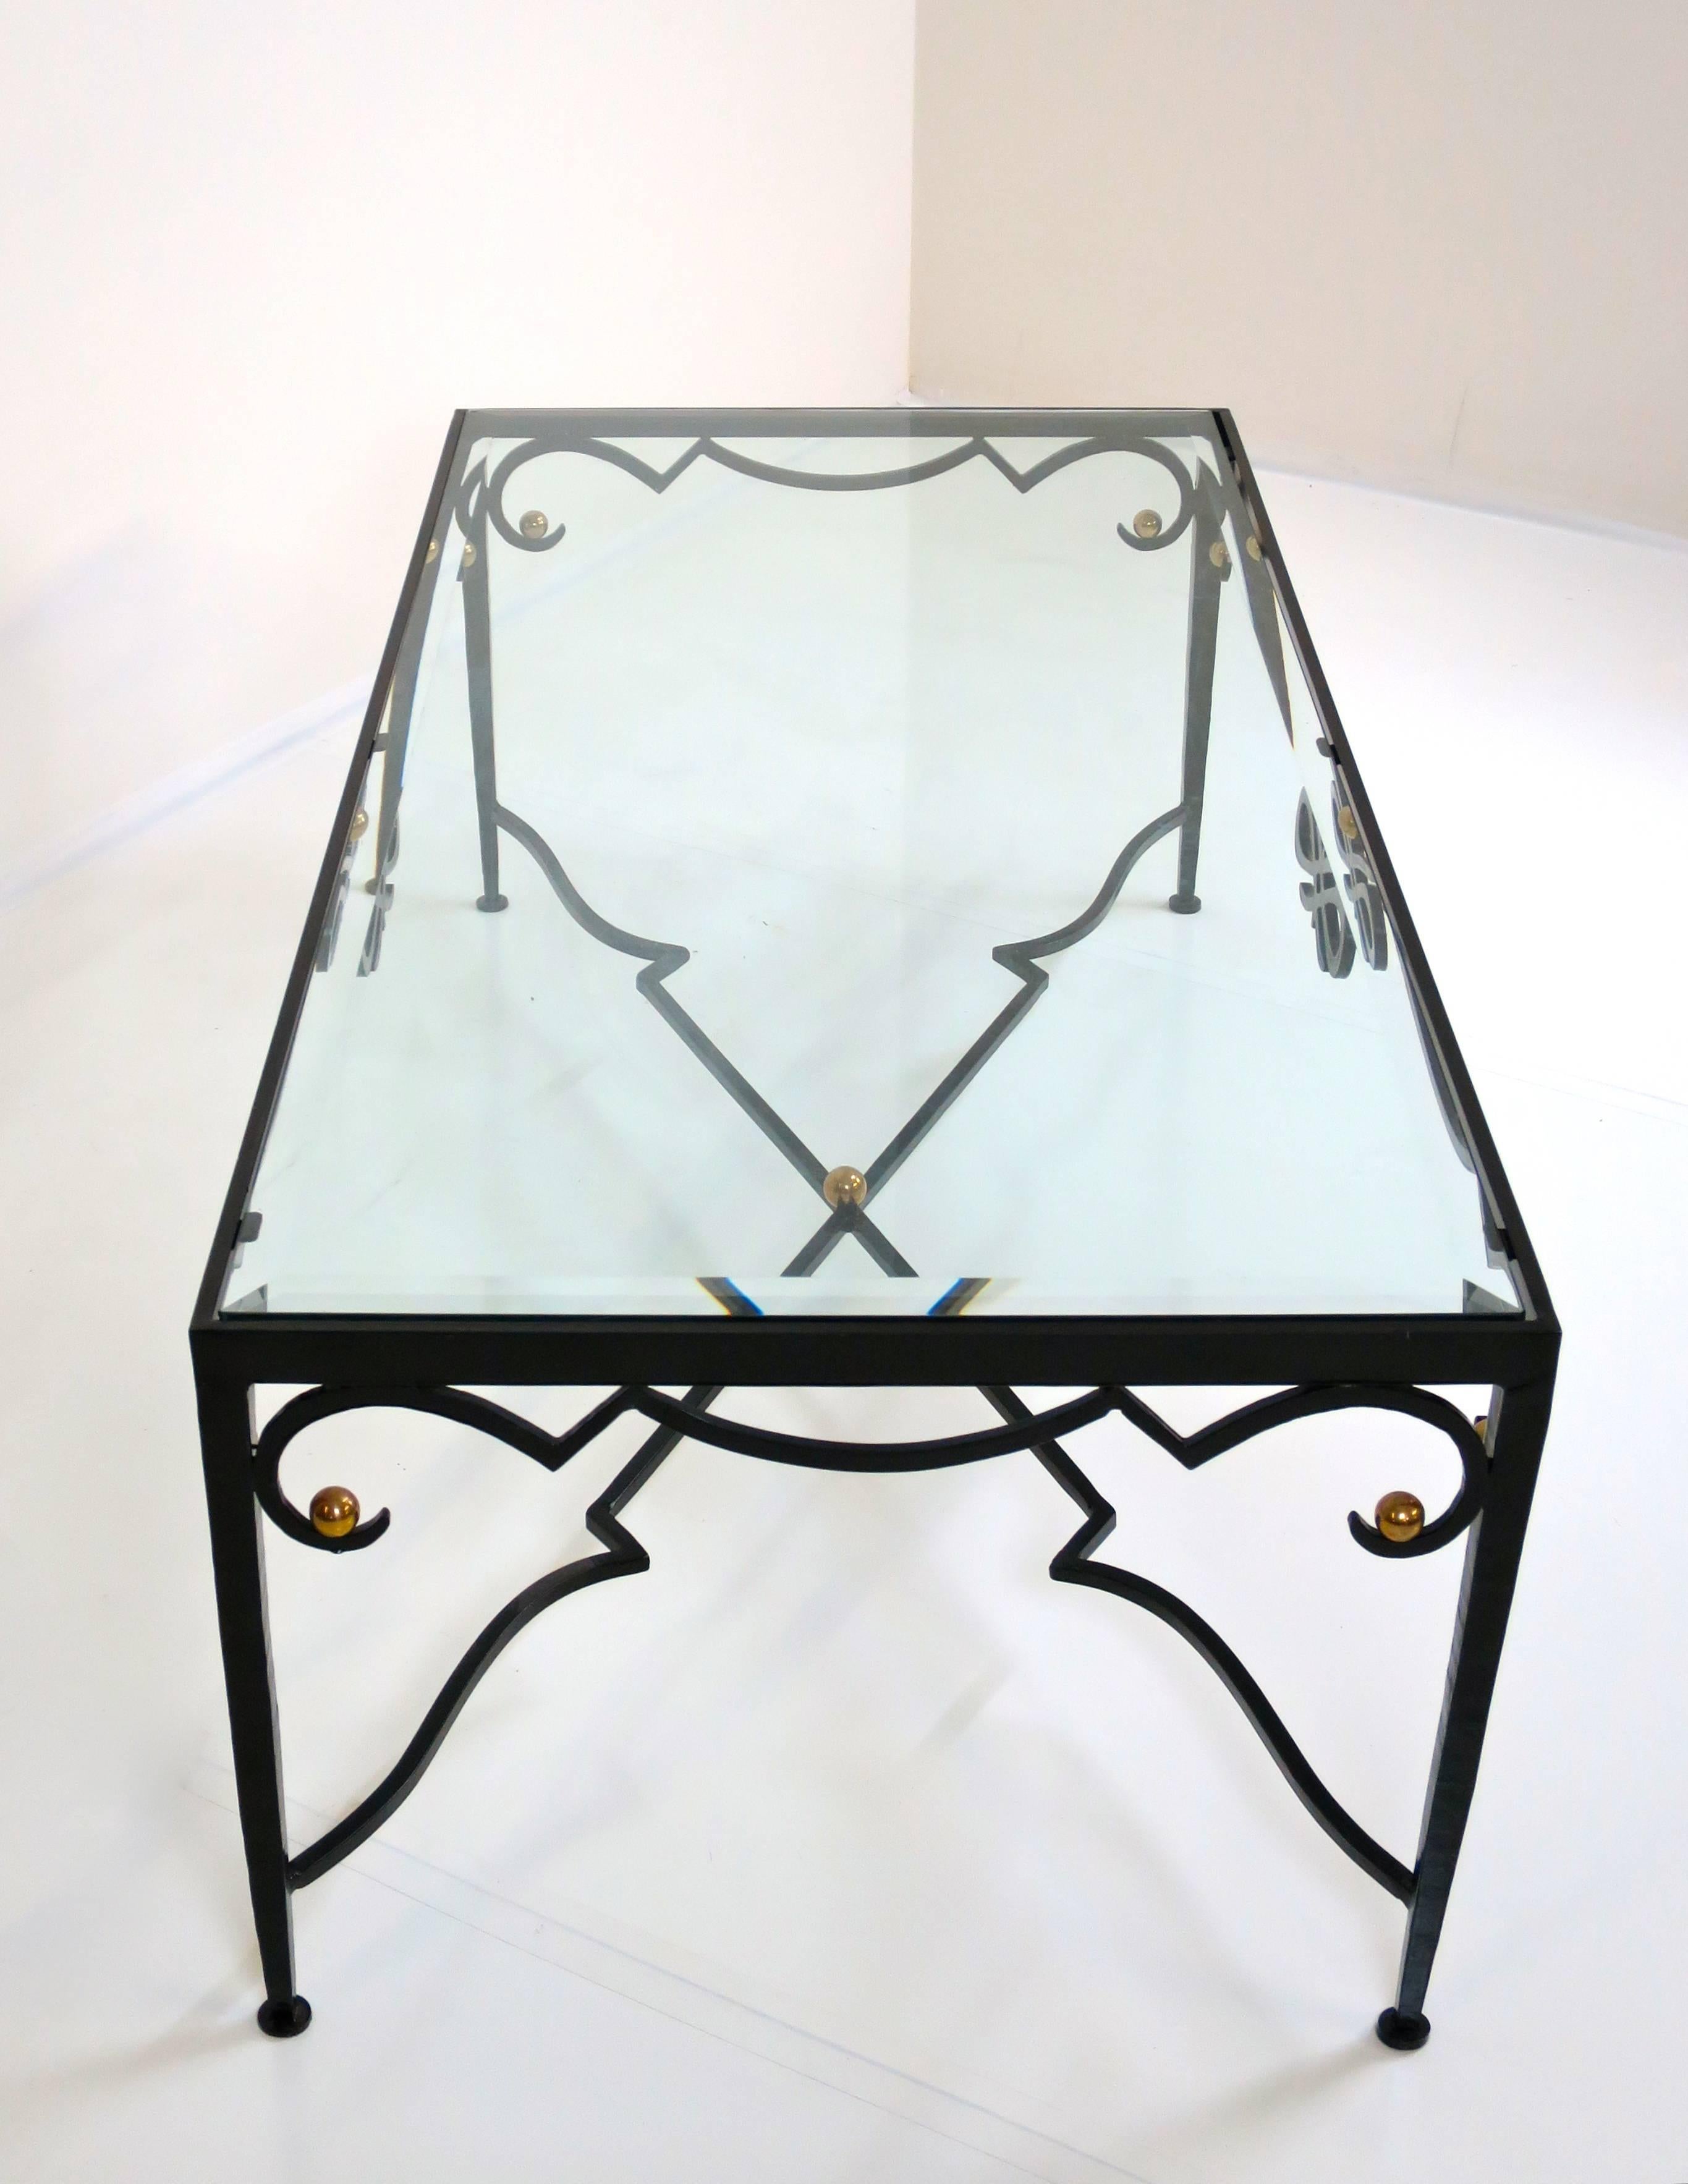 Mid-20th Century French Cocktail Table of Forged Iron with Brass Details, 1960's